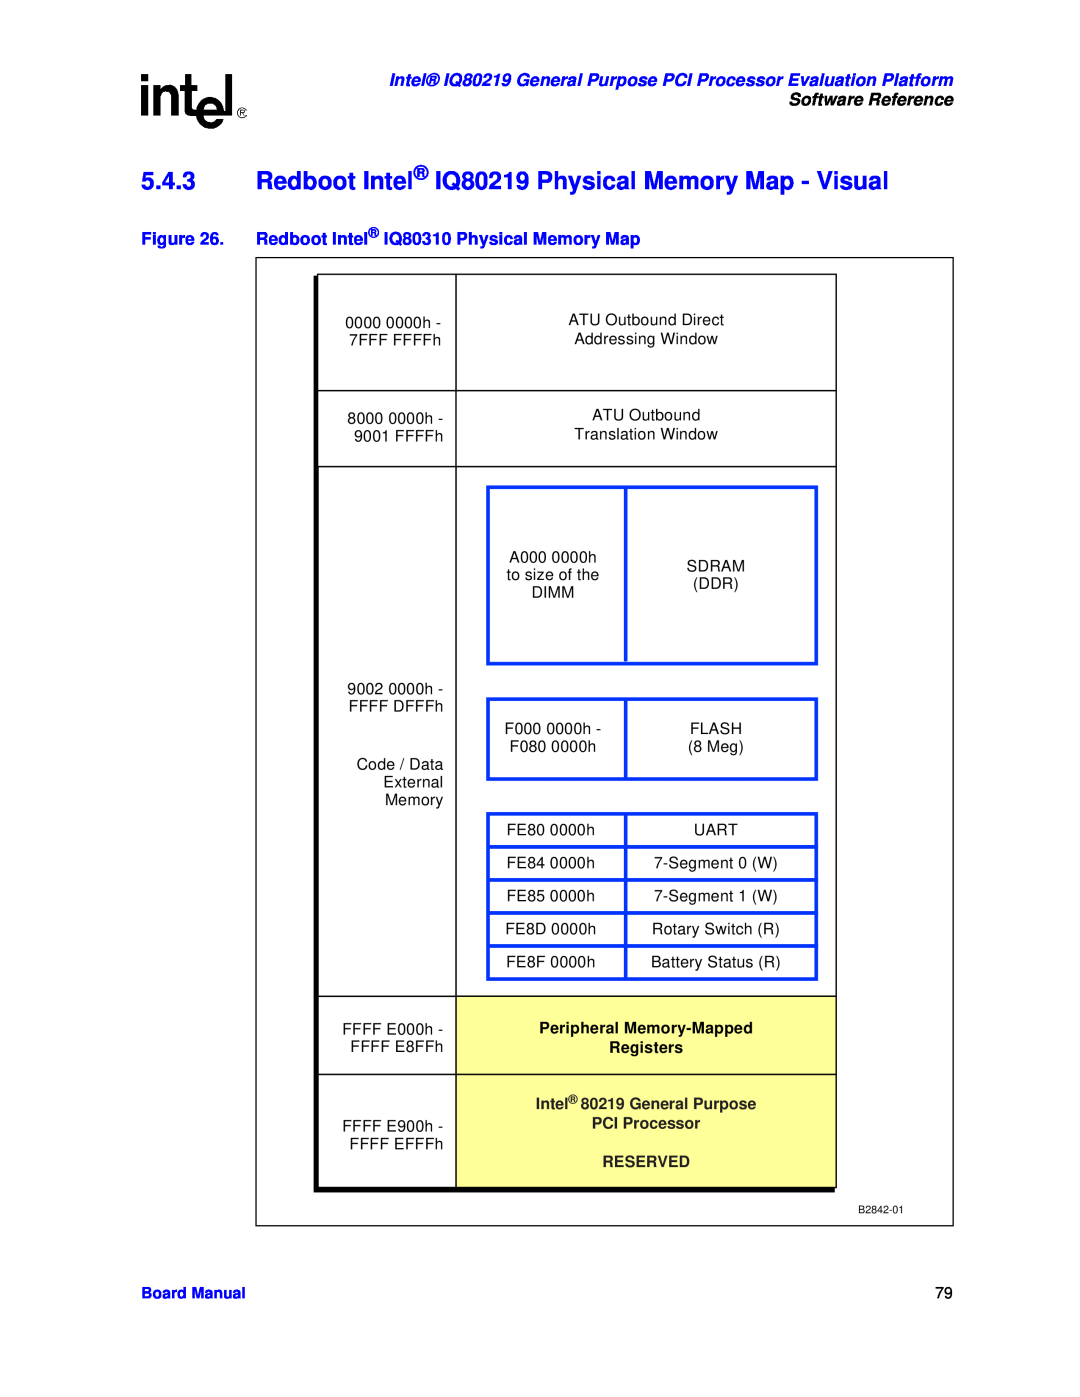 Intel Redboot Intel IQ80219 Physical Memory Map - Visual, Redboot Intel IQ80310 Physical Memory Map, Software Reference 